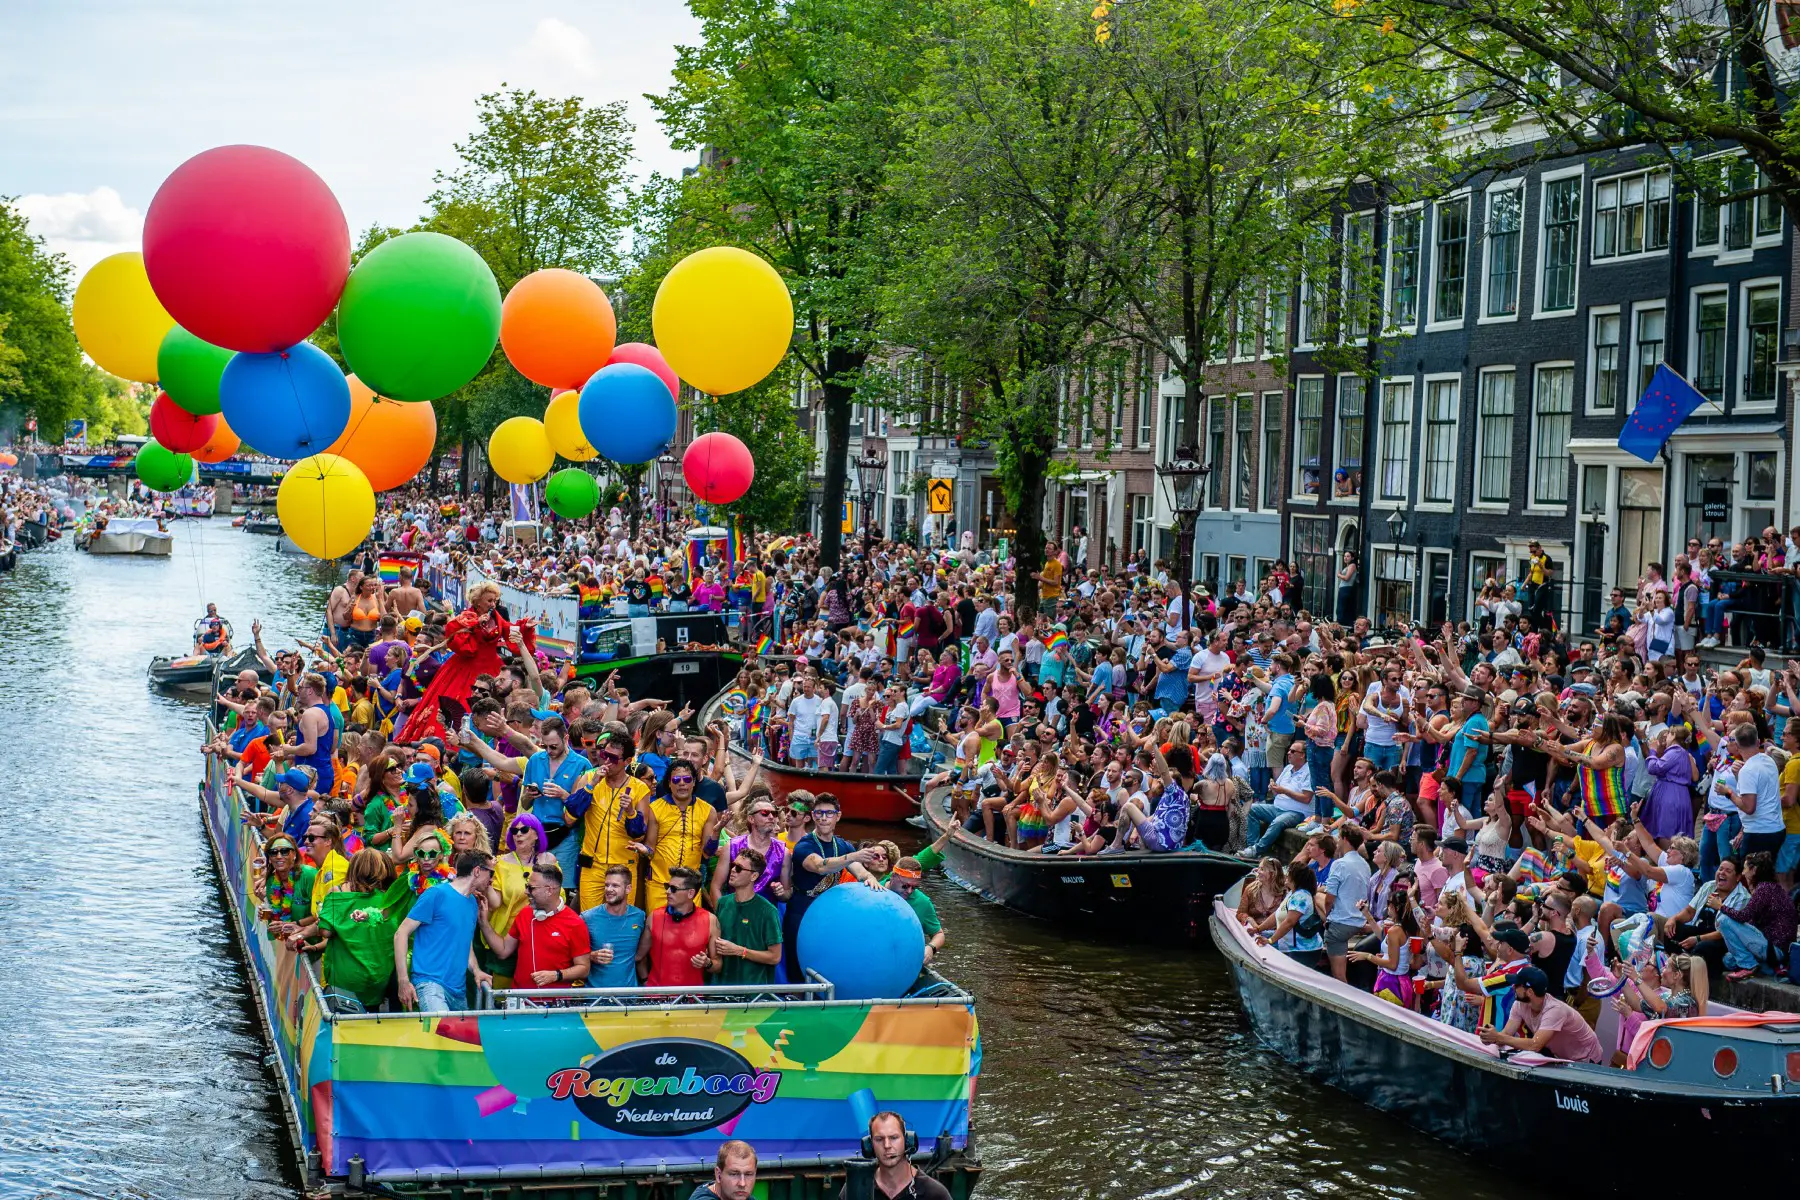 Float with balloons sails through busy Canal Parade in Amsterdam